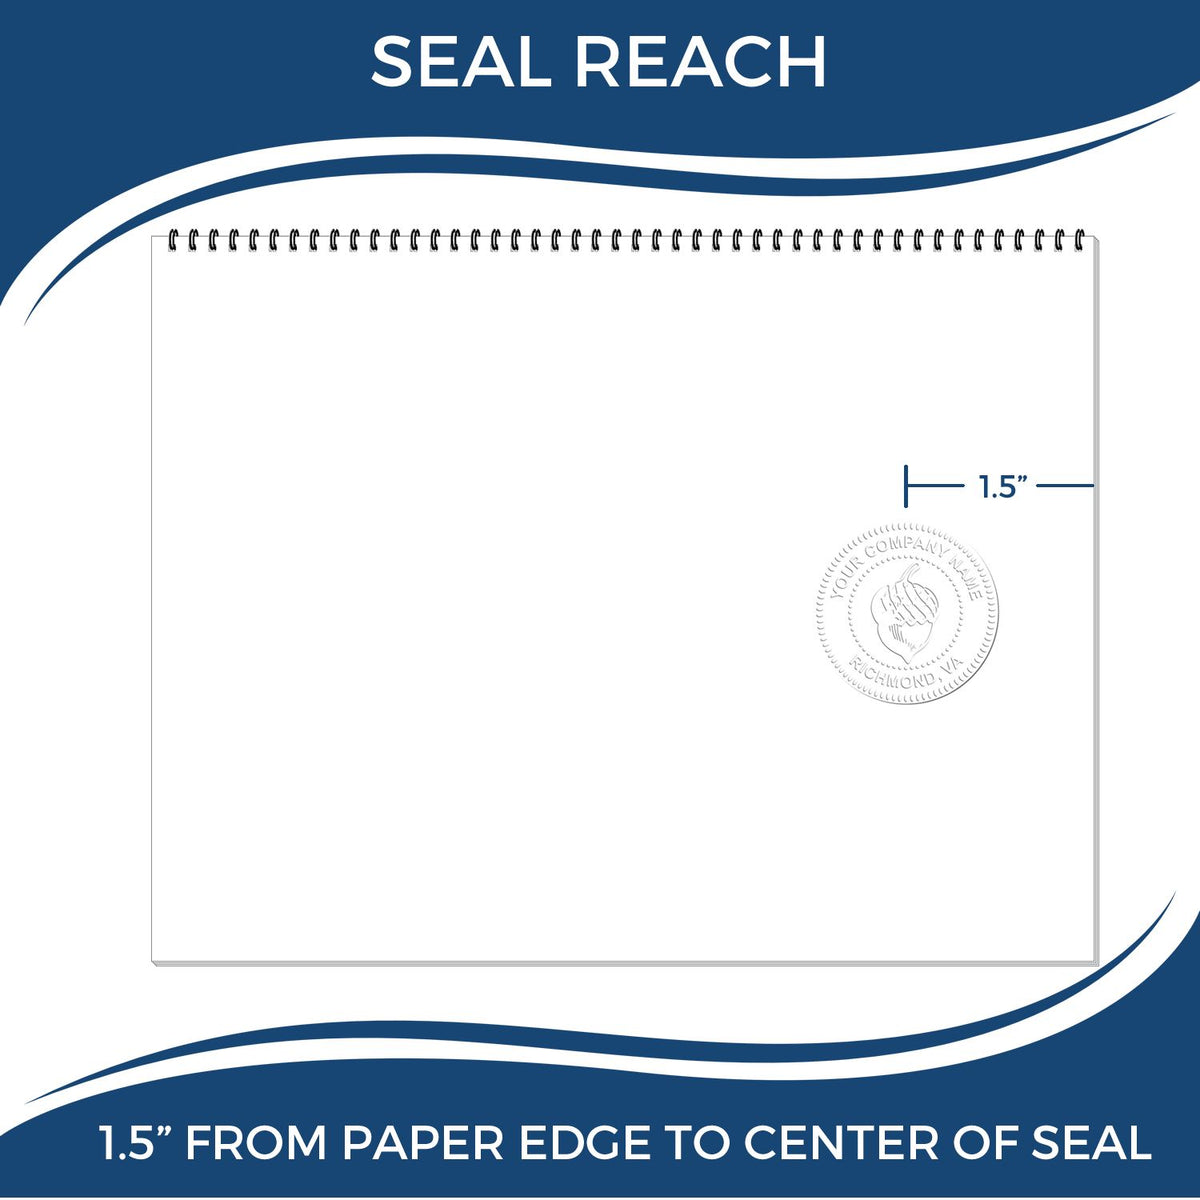 An infographic showing the seal reach which is represented by a ruler and a miniature seal image of the Nevada Desk Architect Embossing Seal